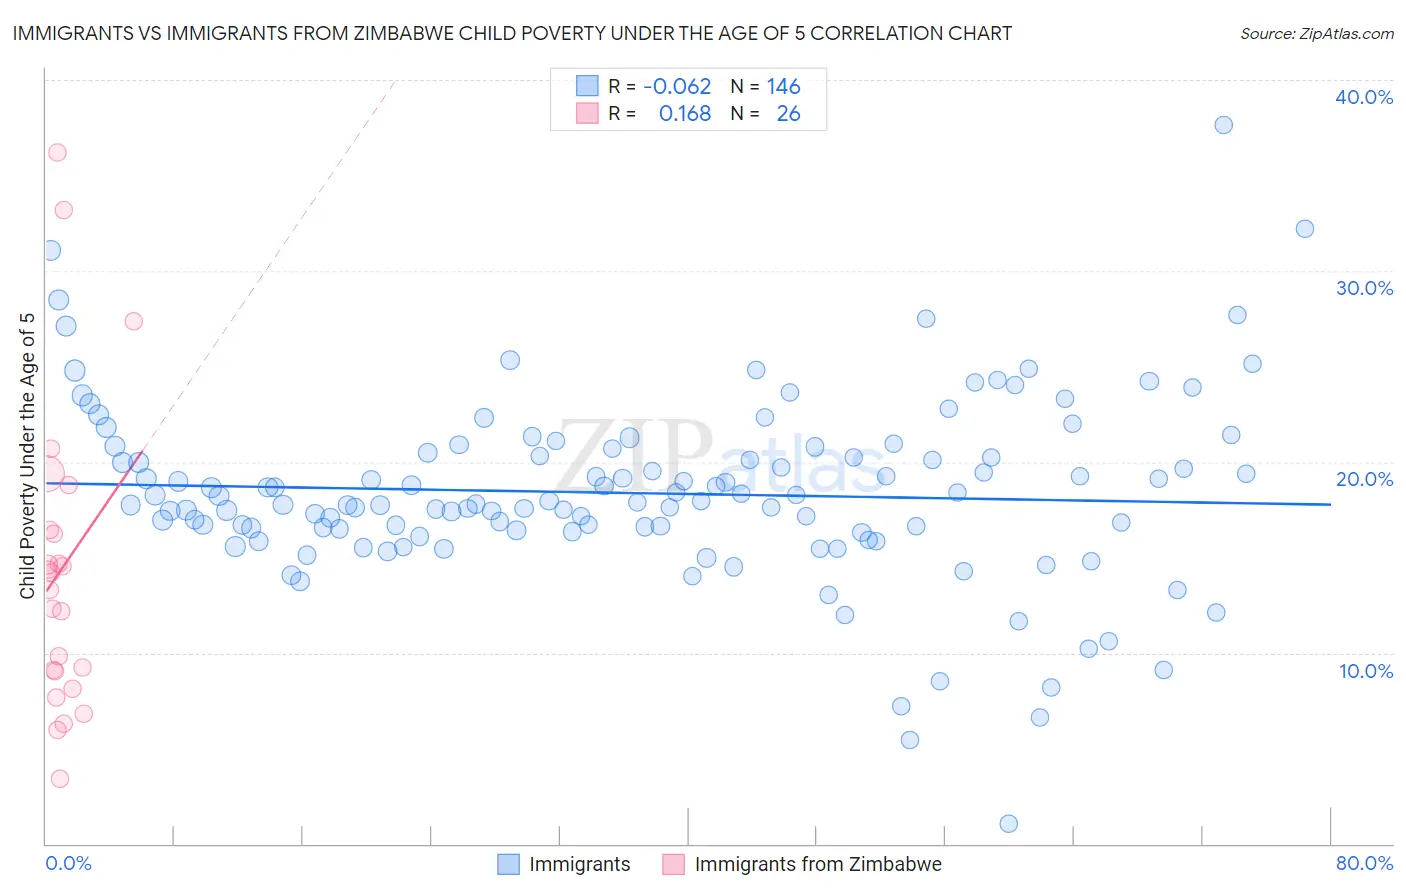 Immigrants vs Immigrants from Zimbabwe Child Poverty Under the Age of 5